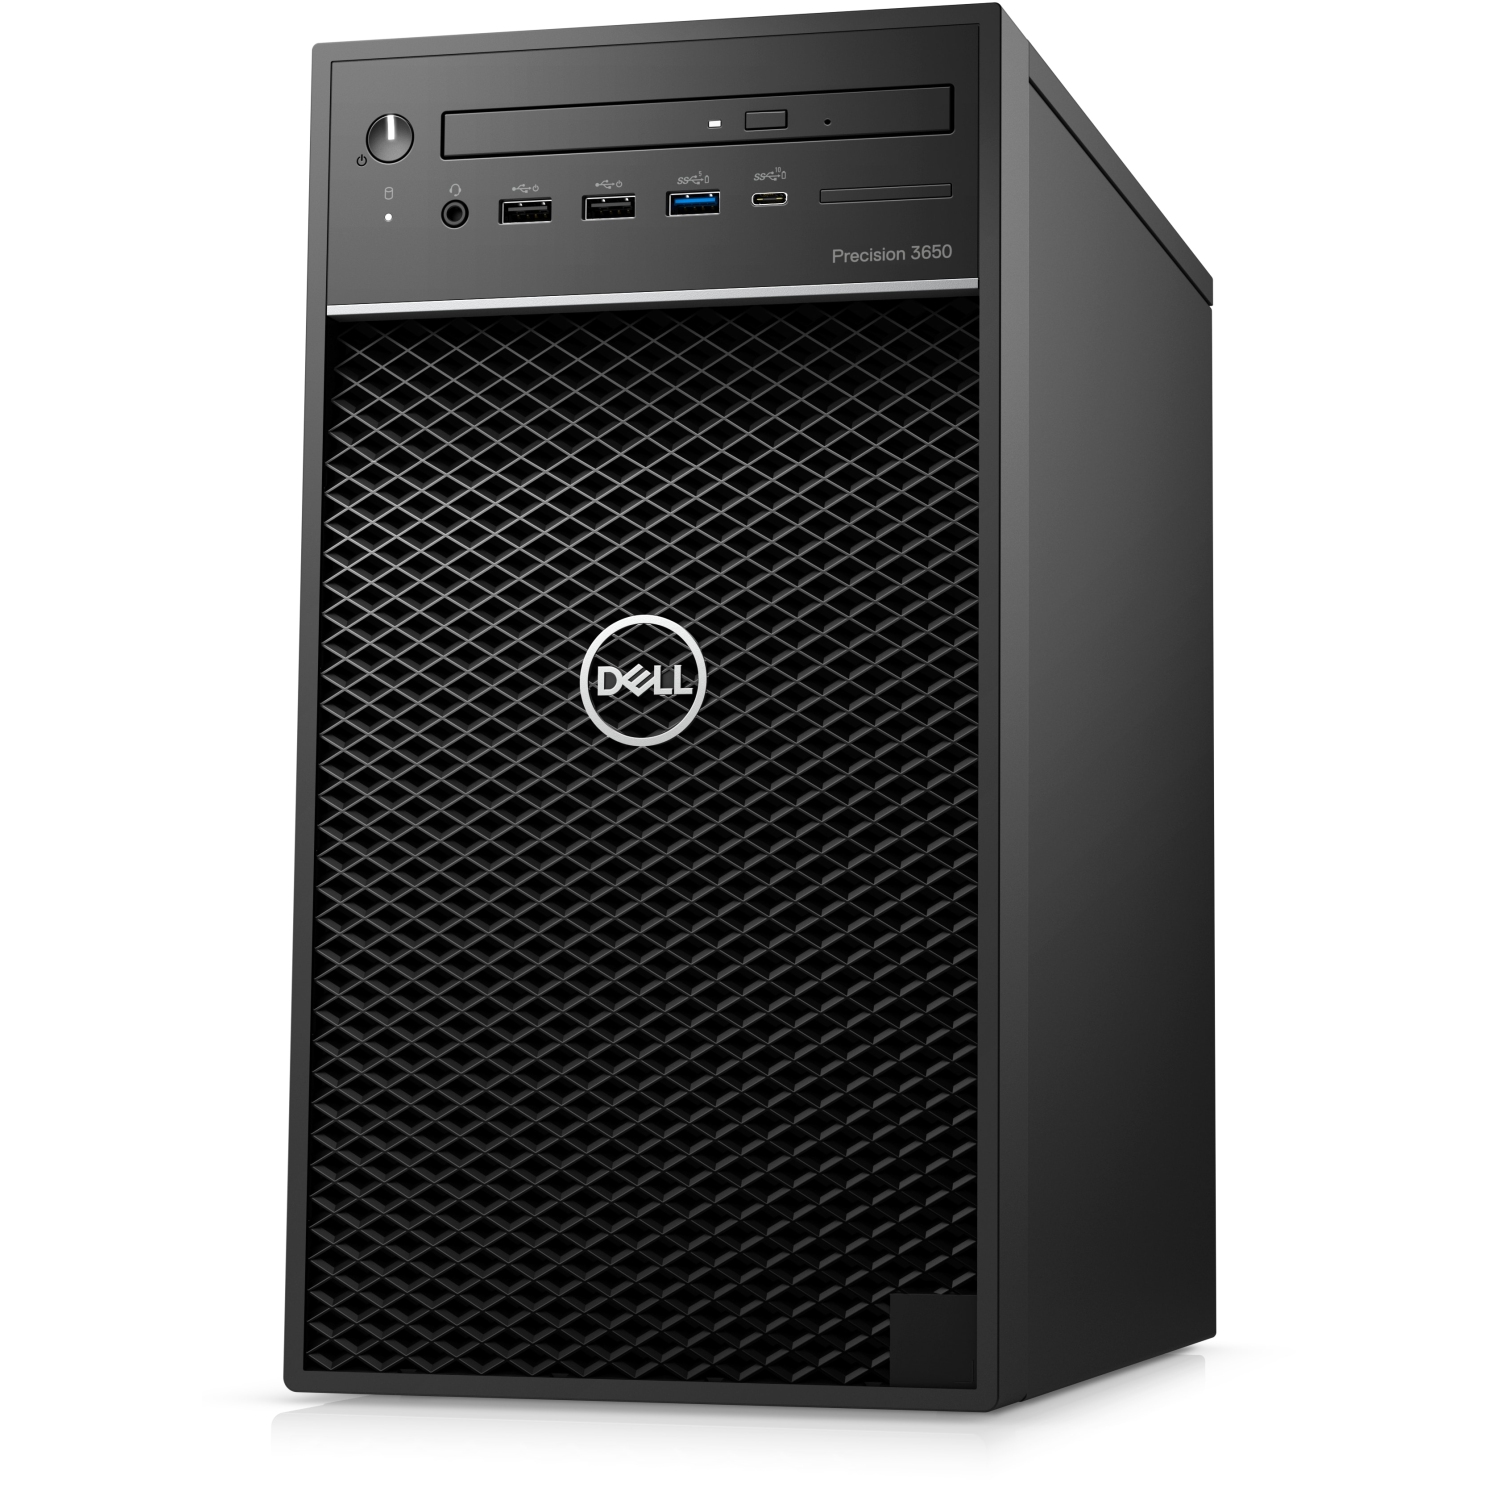 Refurbished (Excellent) - Dell Precision T3650 Workstation Desktop (2021), Core i9 - 2TB SSD + 1TB HDD - 128GB RAM, 8 Cores @ 5.3 GHz - 11th Gen CPU Certified Refurbished